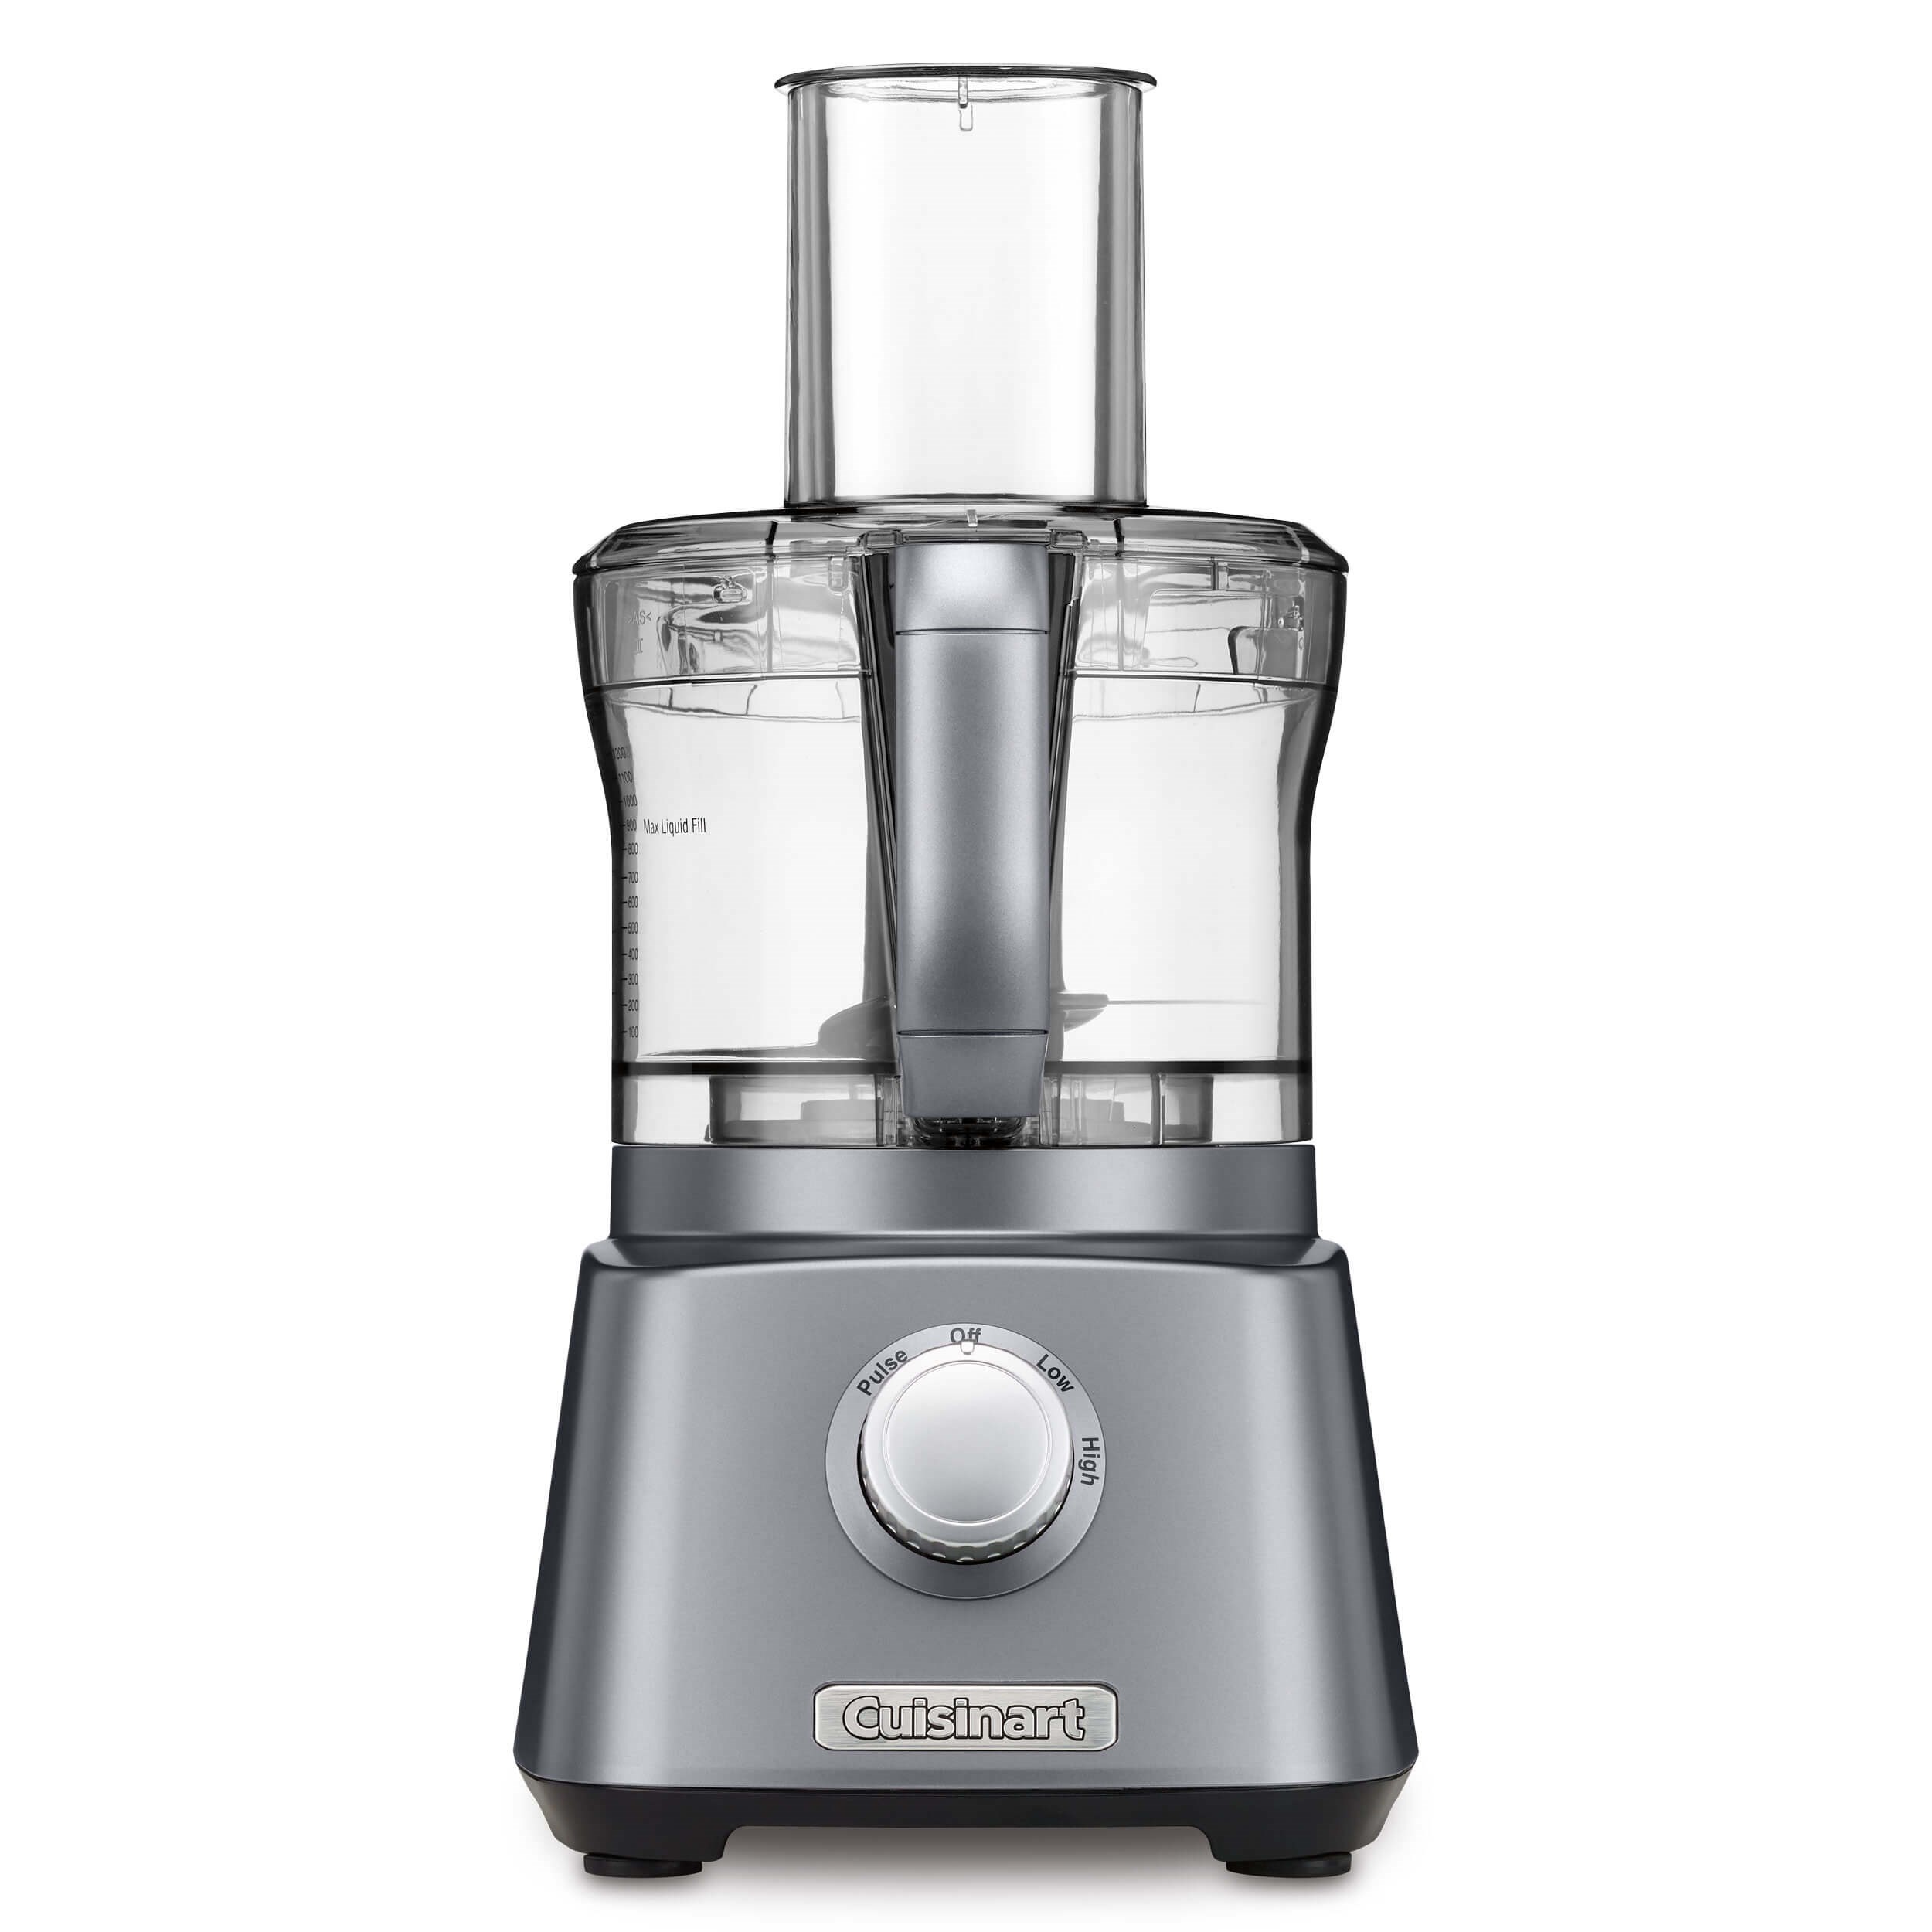 Discontinued Cuisinart Kitchen Central 3-in-1 Food Processor